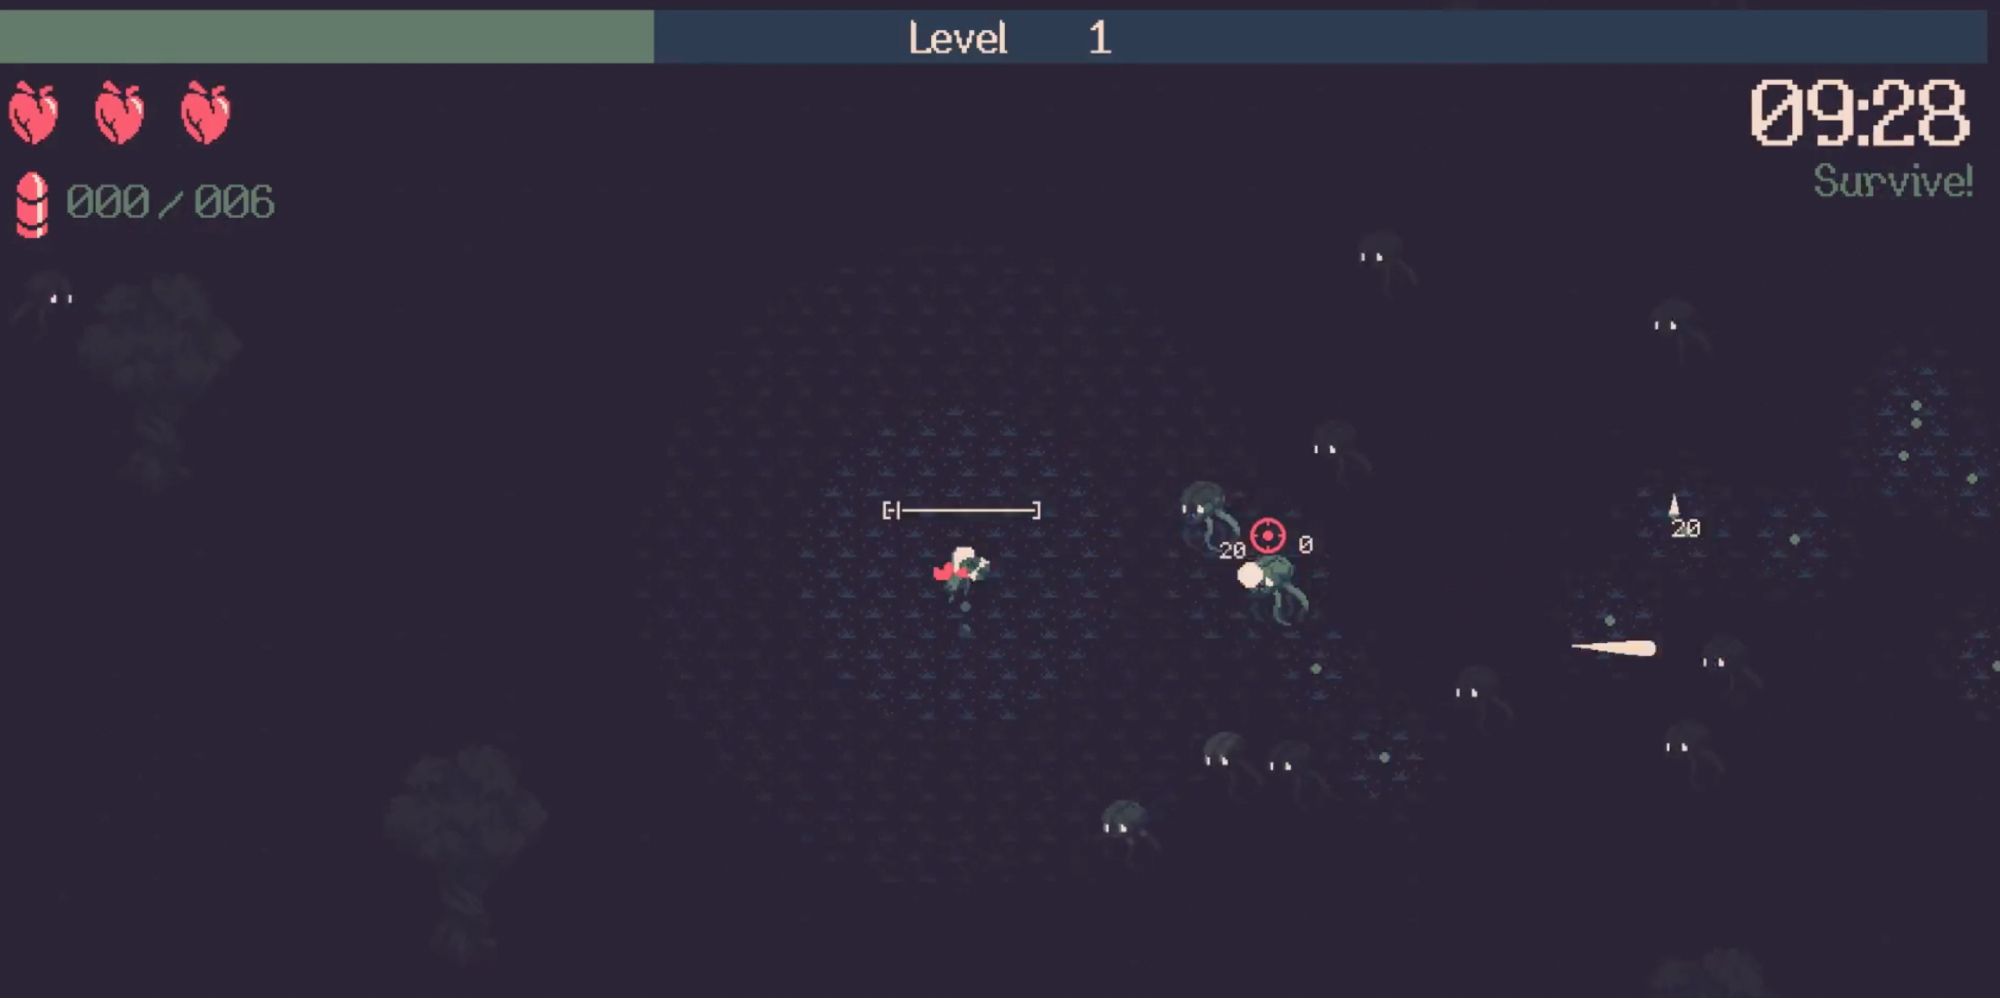 20 Minutes Till Dawn - Feature - Player kills monsters to level up